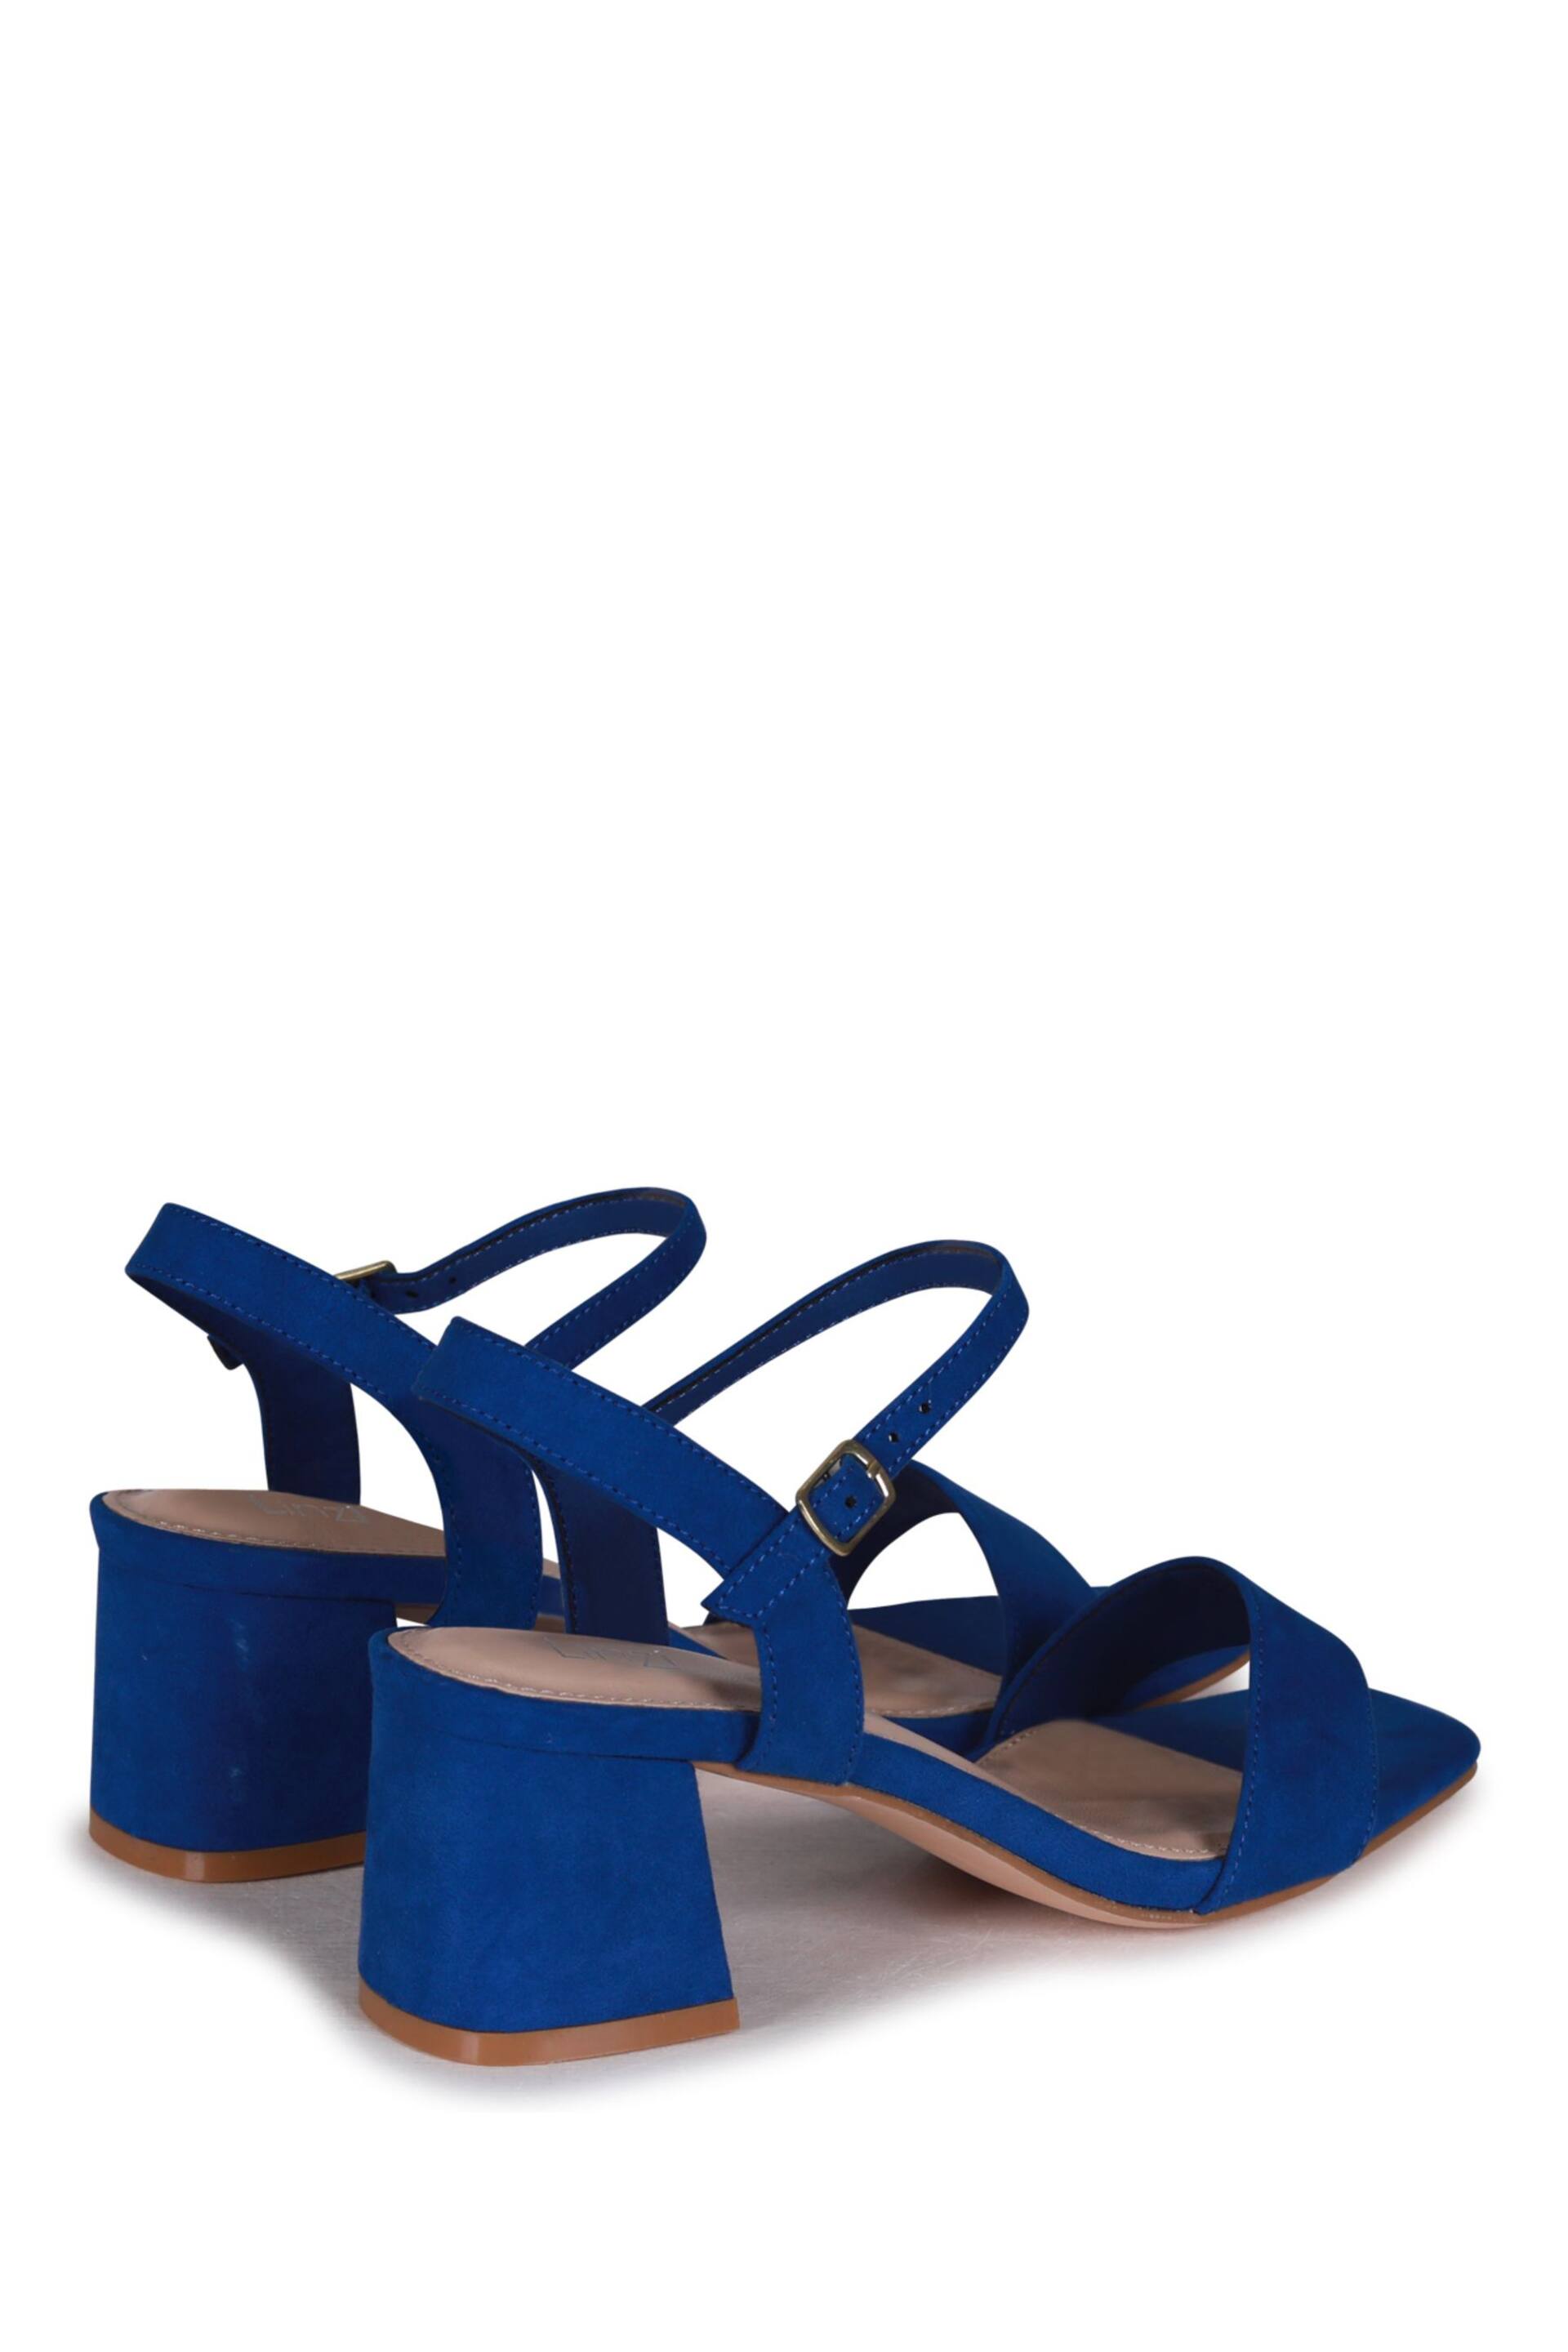 Linzi Cobalt Blue Darcie Barely There Block Heeled Sandals - Image 7 of 9